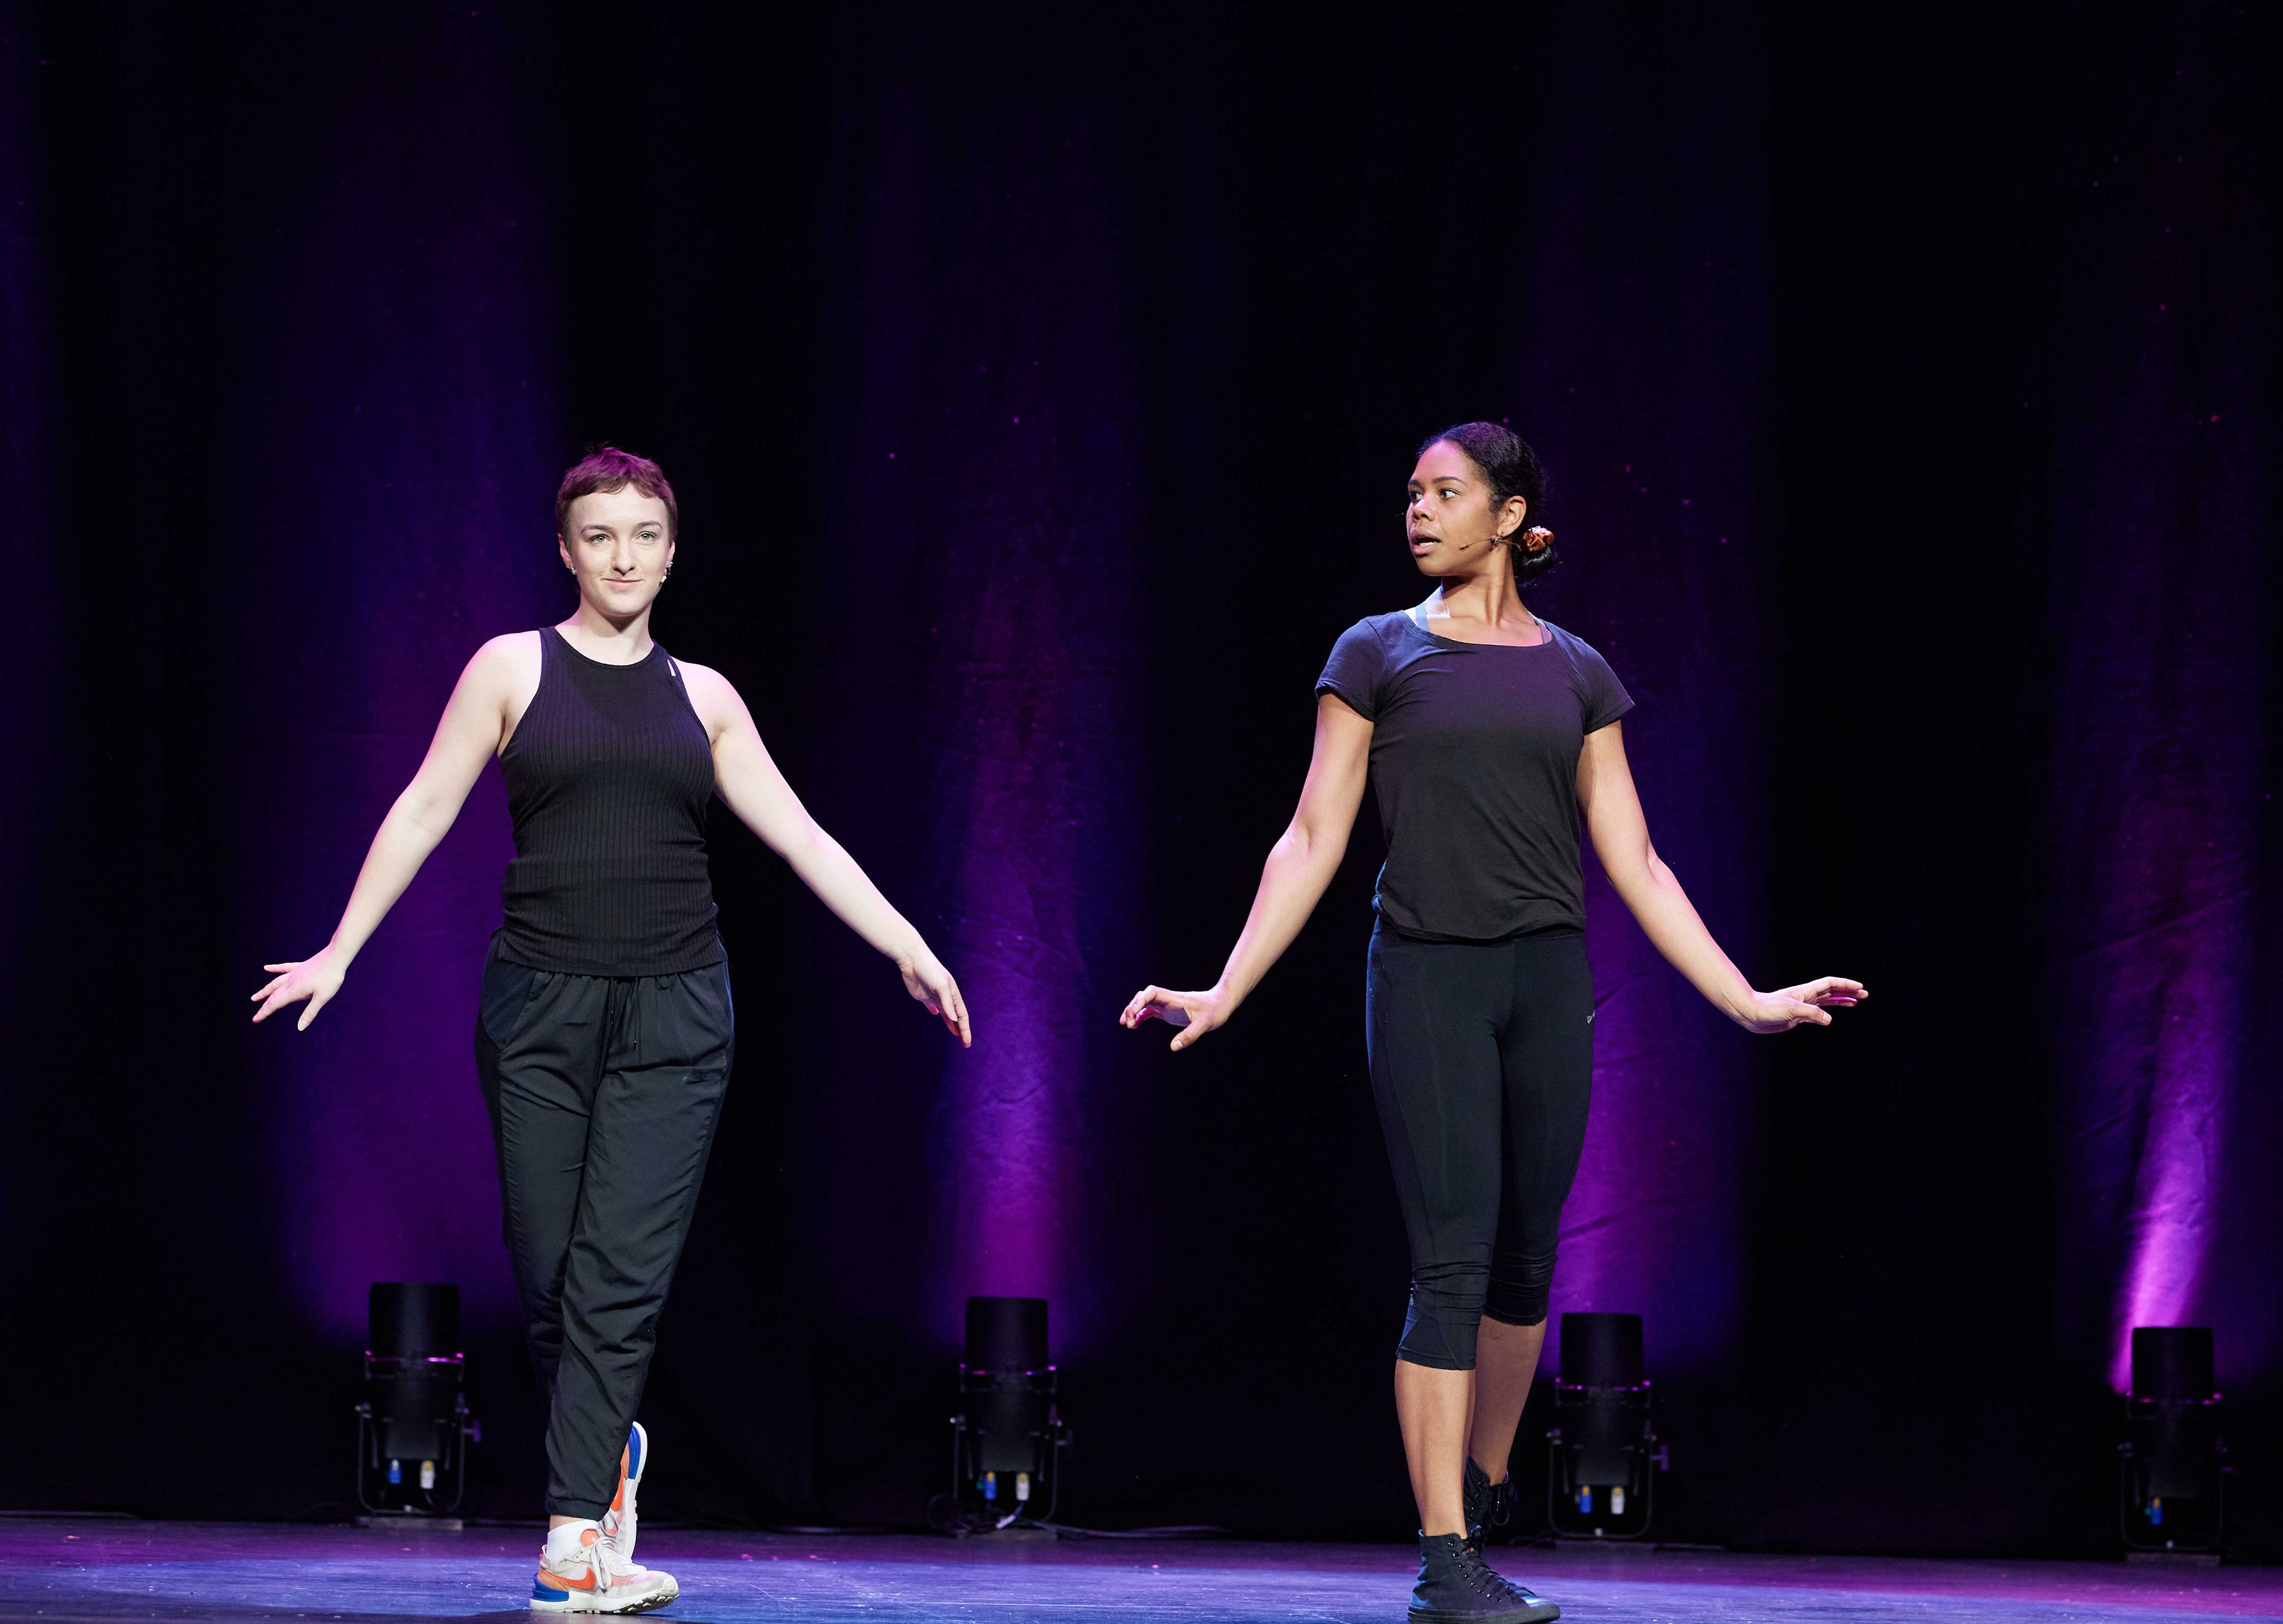 Two woman pose like dancers on stage. They stand next to each other with purple lighting behind them.